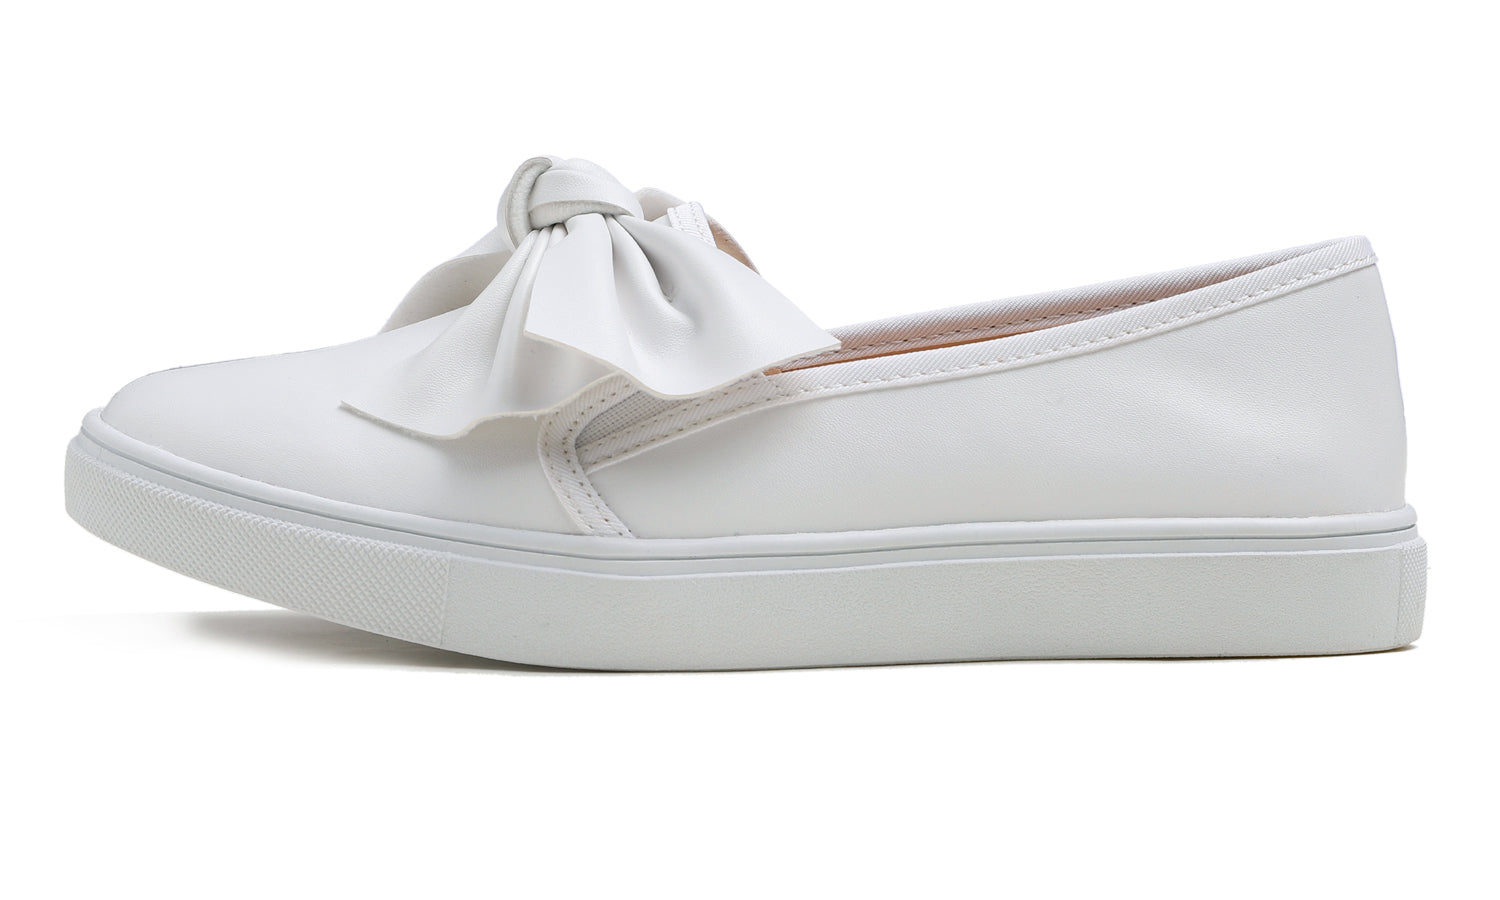 Feversole Women's Casual Slip On Sneaker Comfort Cupsole Loafer Flats White Bow Vegan Leather